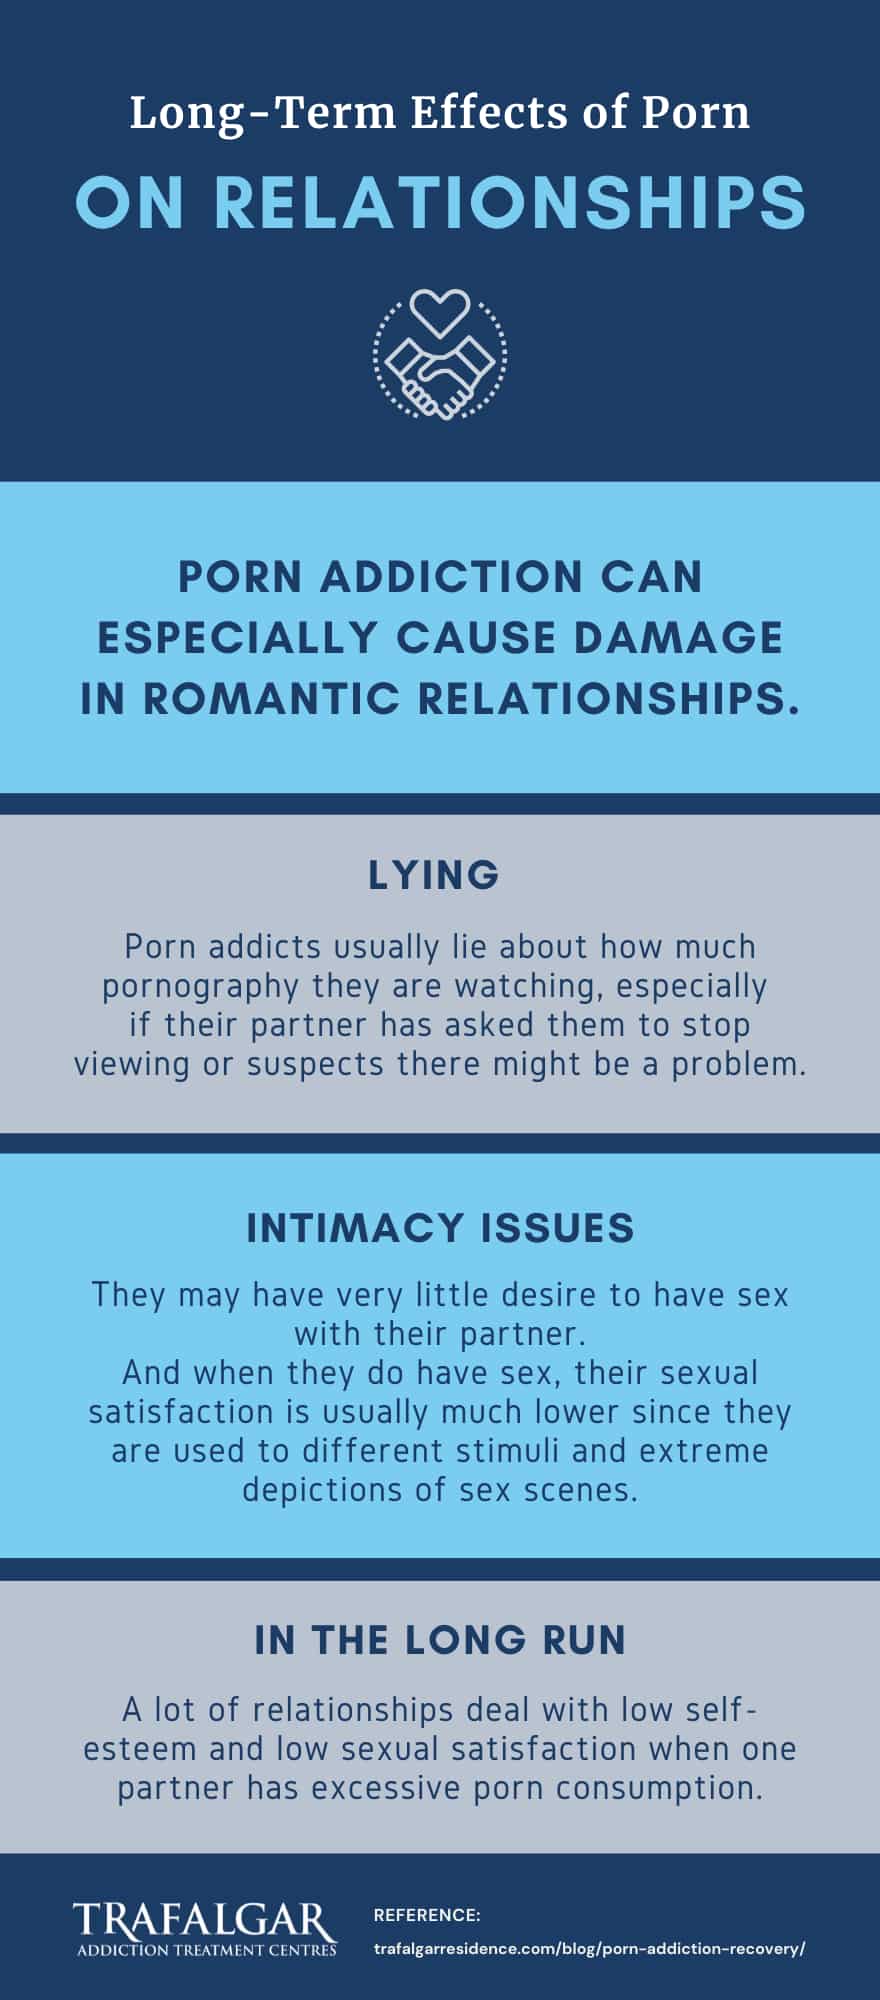 An infographic explaining long-term effects of porn on relationships.